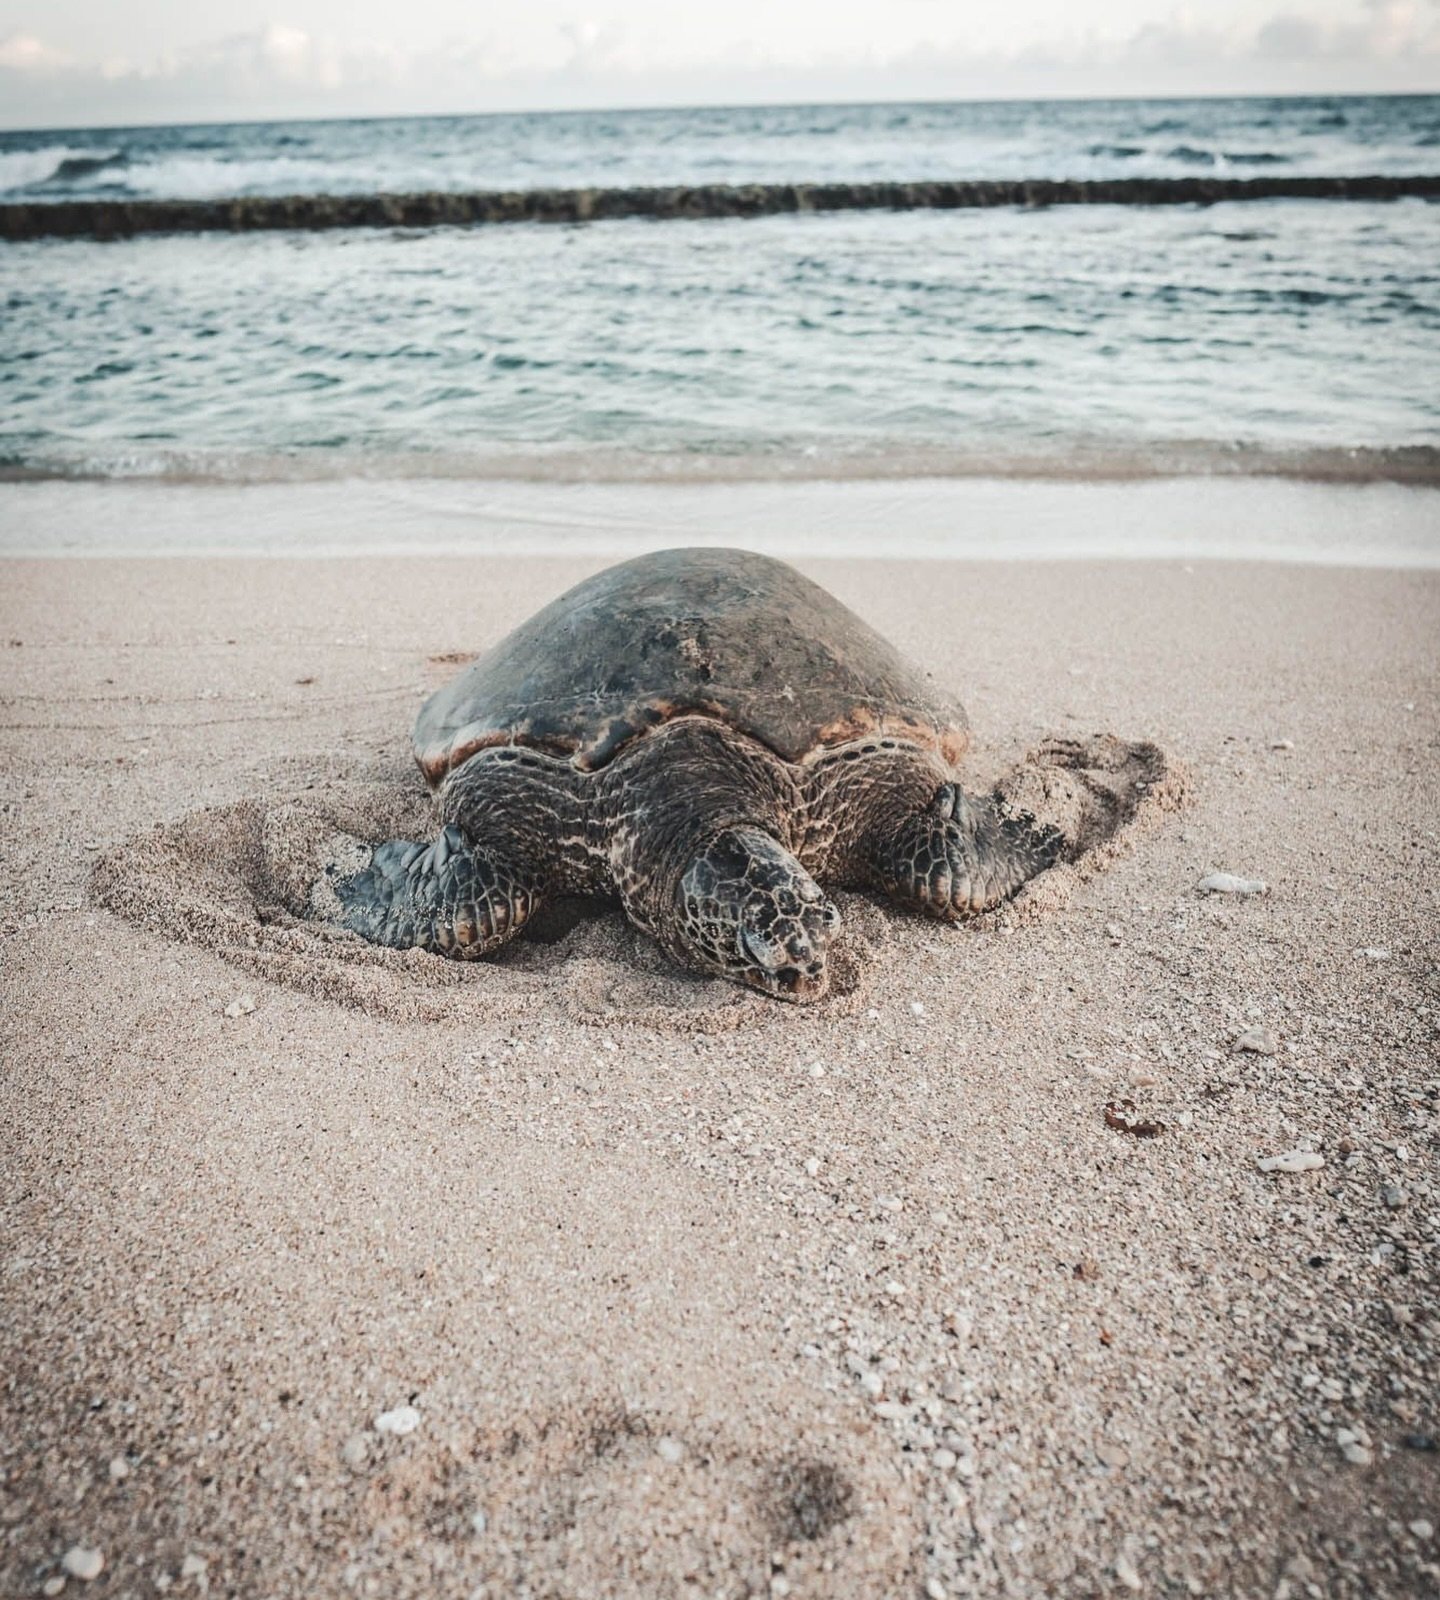 Honu 🐢(Hawaiian Green Sea Turtle) captured by @alexurbie 
&bull;
&bull;
Have you seen a Honu before?
These beautiful turtles are one of Hawaii&rsquo;s endangered species, so if you&rsquo;re lucky to encounter one, keep a 10-foot distance and honor t